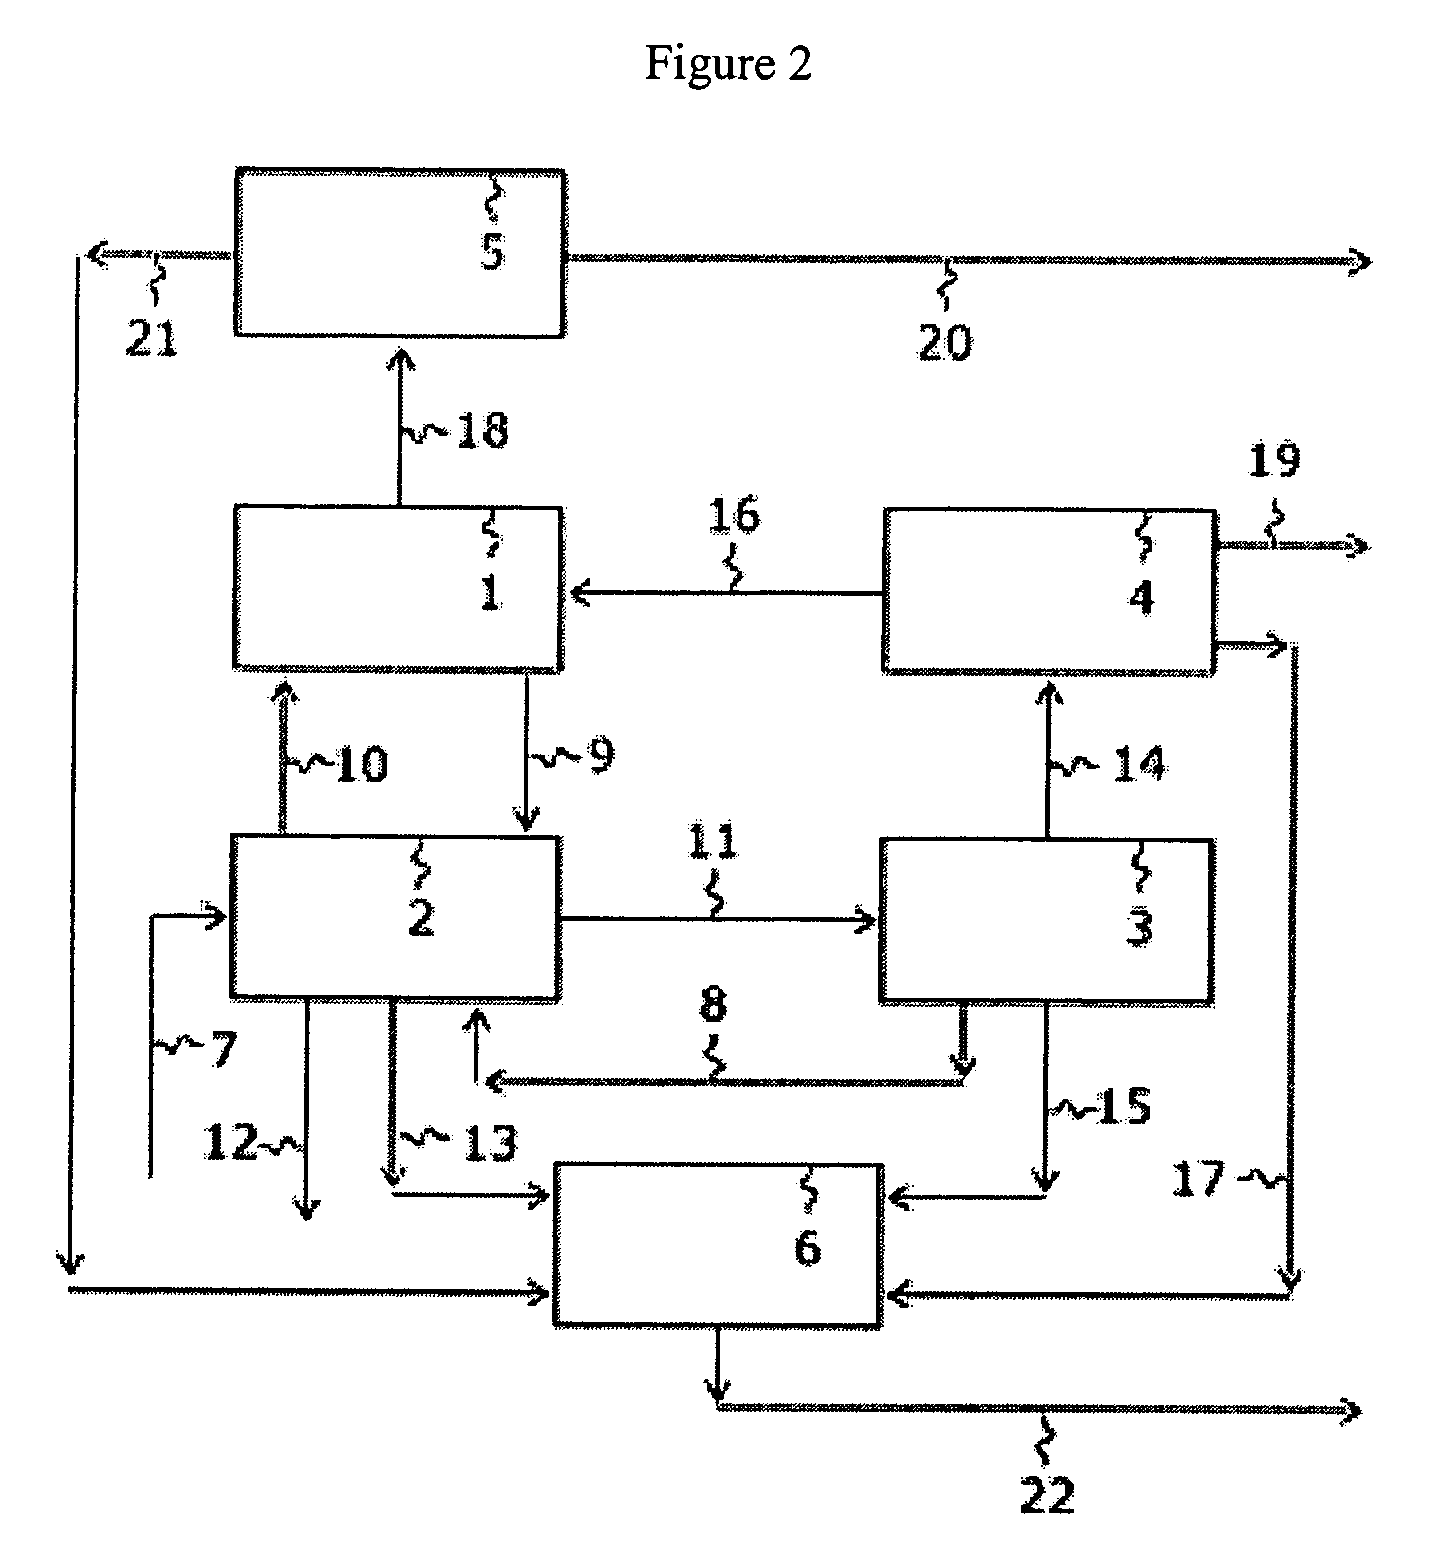 Method and apparatus for local fluorine and nitrogen trifluoride production